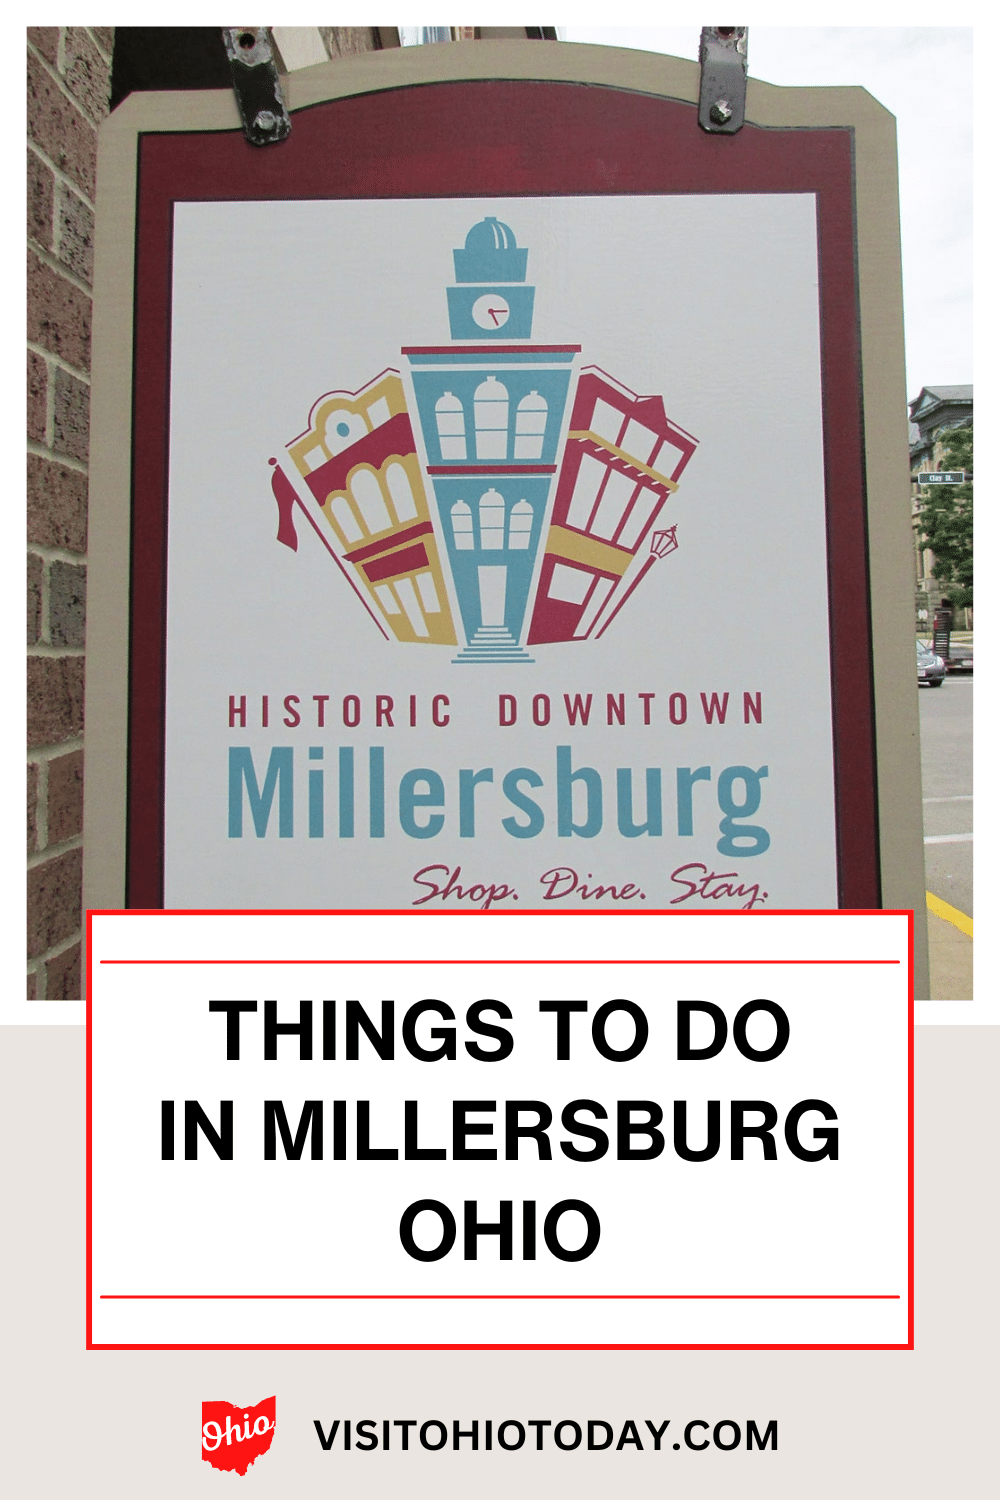 Millersburg is in Holmes County, Ohio. Millersburg may not be the biggest of towns, but it has plenty to offer visitors. In this article we are featuring some of the things to do in Millersburg Ohio.